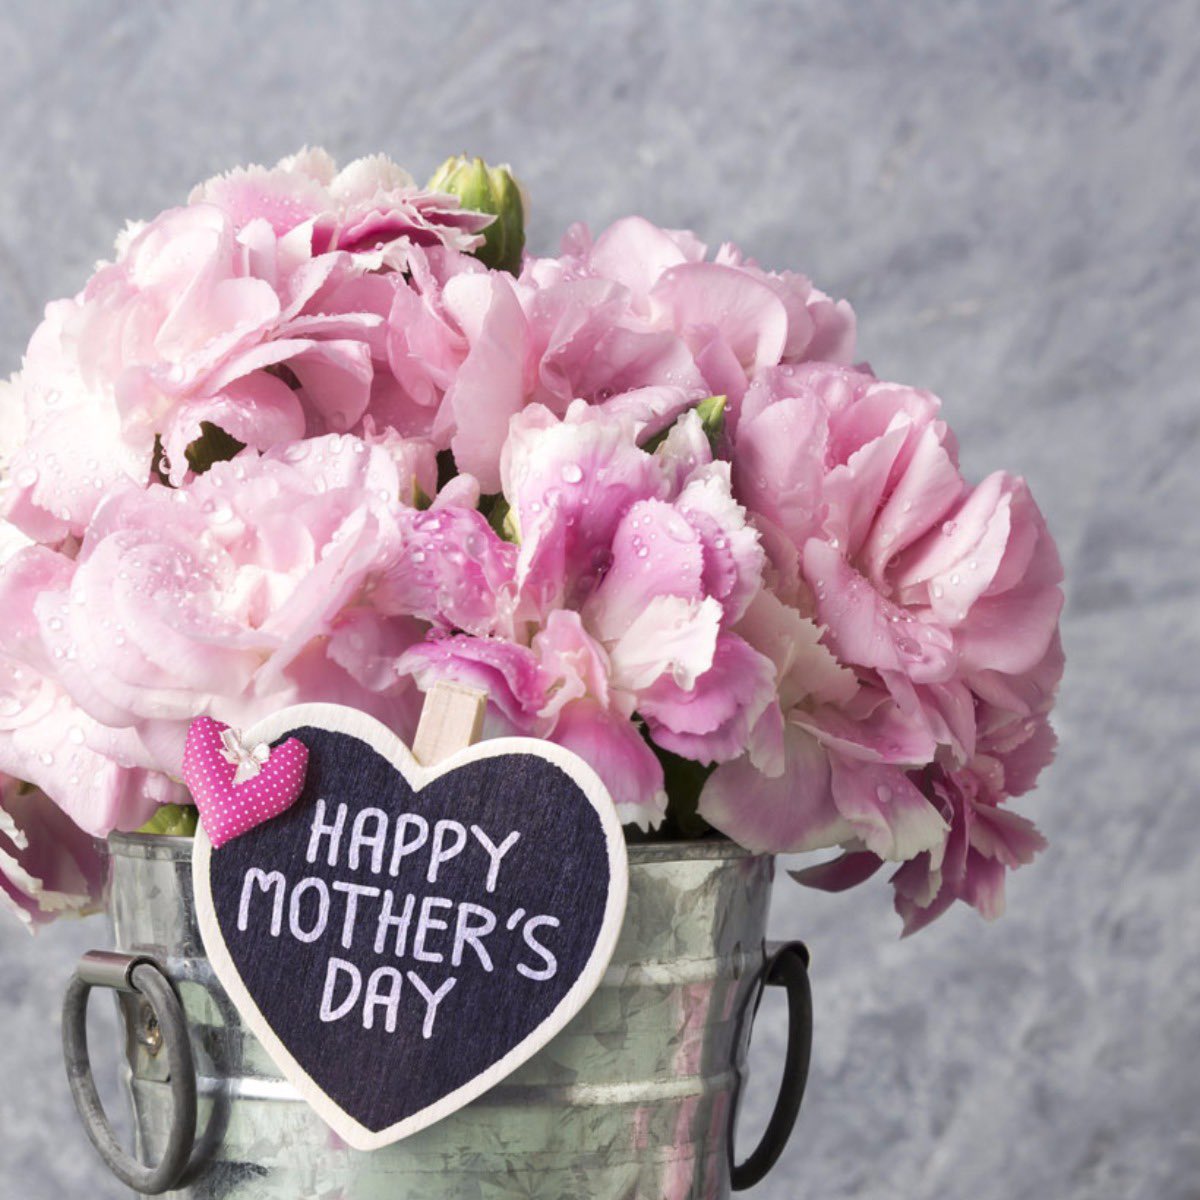 To all the Region 4 mothers … 💐